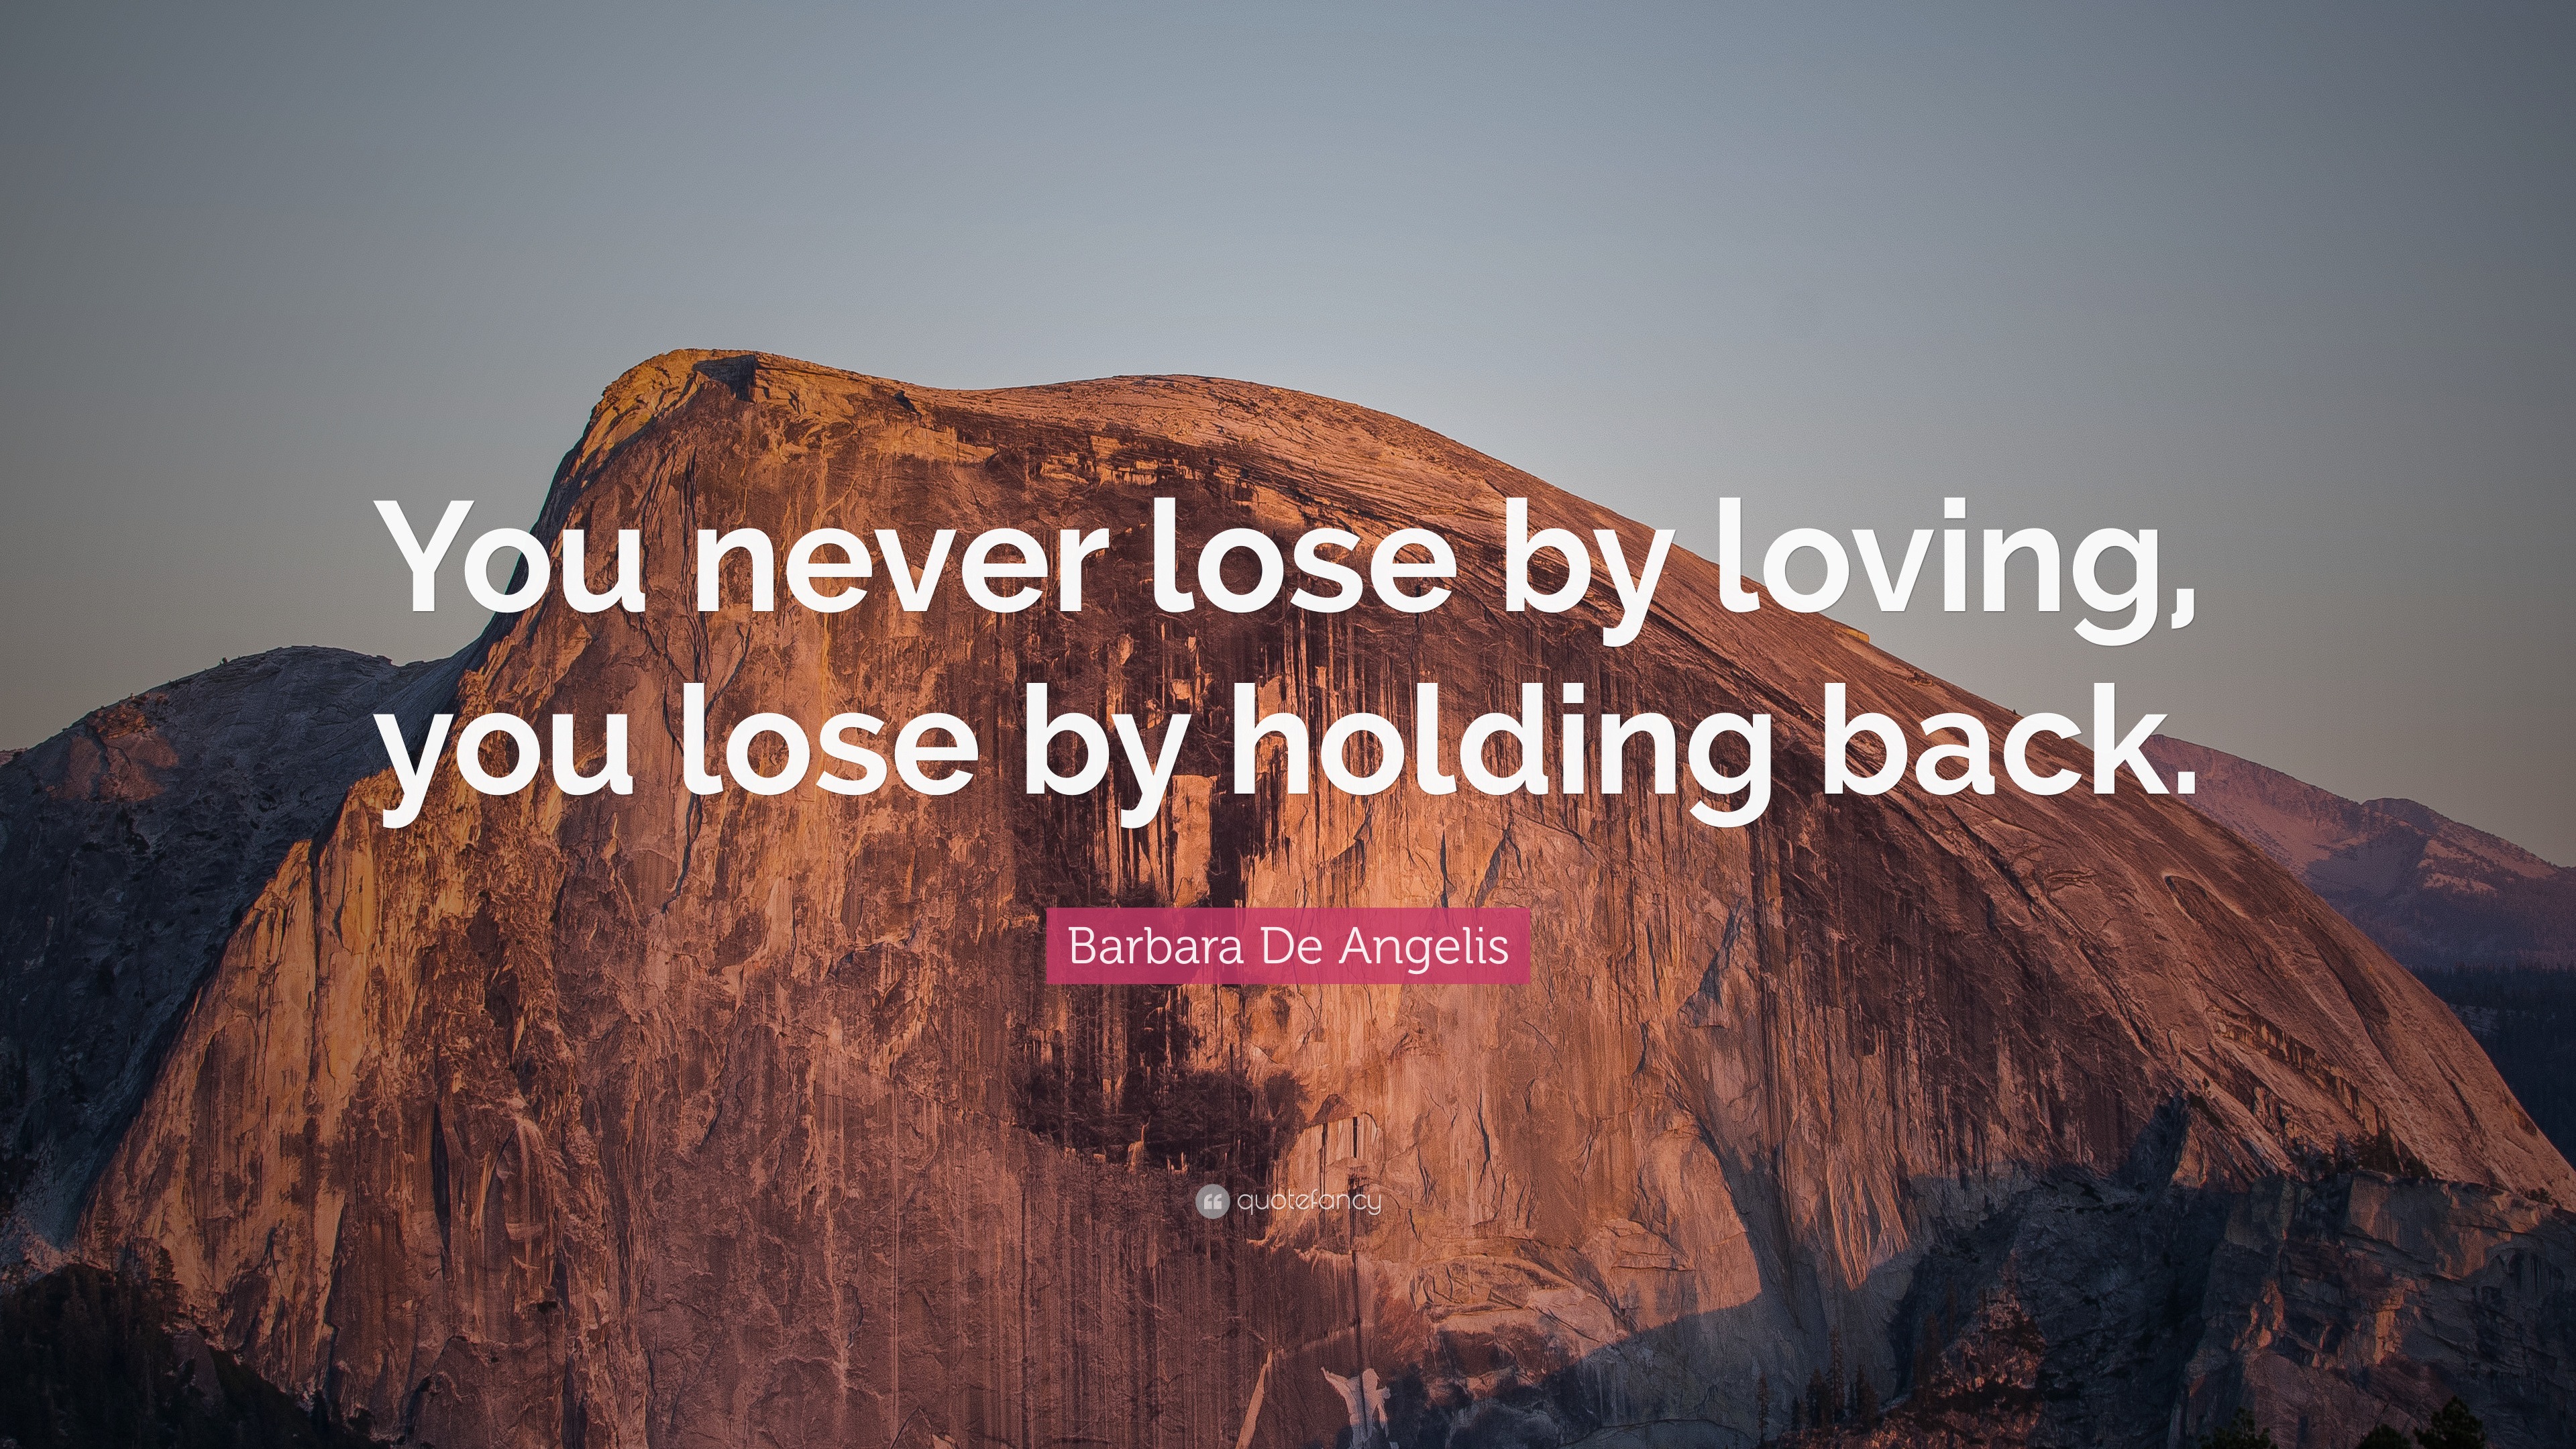 Barbara De Angelis Quote “You never lose by loving you lose by holding